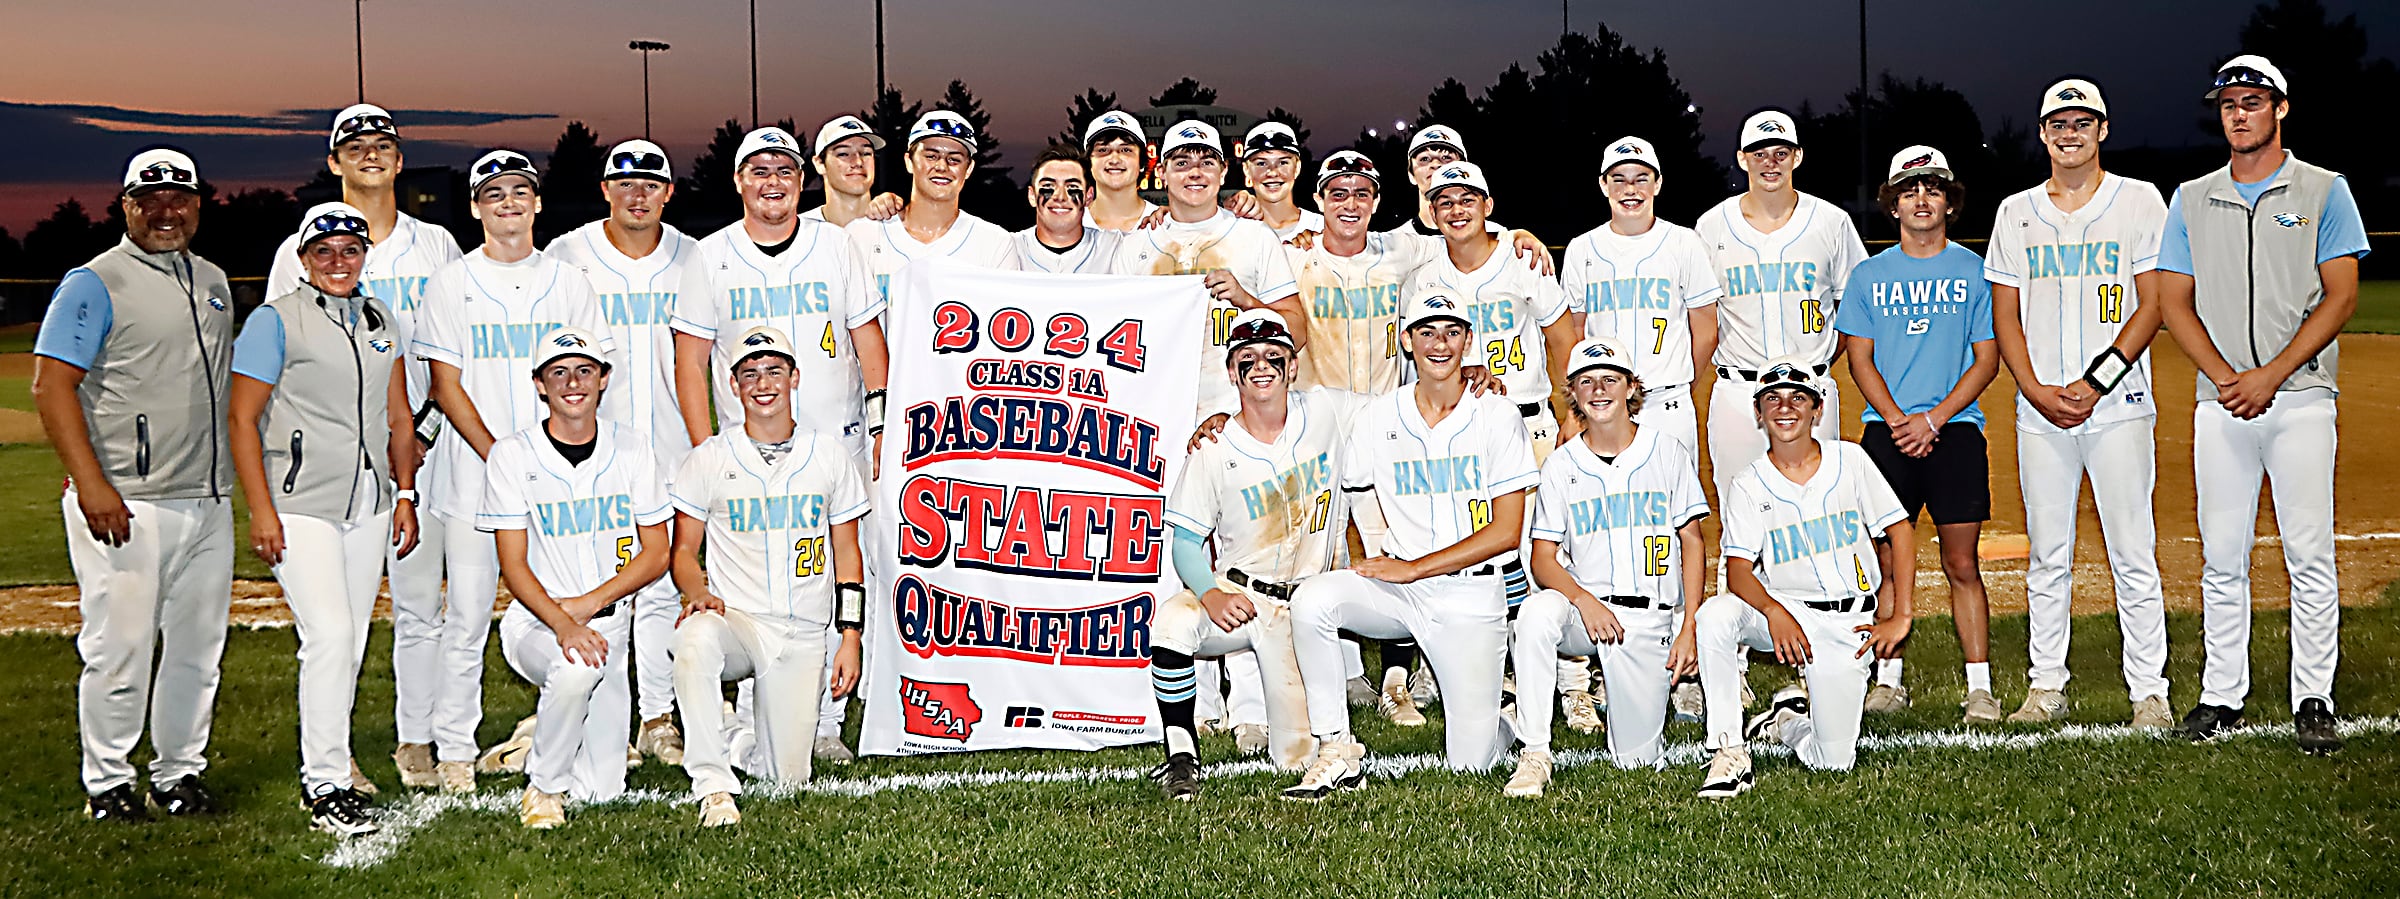 L-S baseball to face familiar foe at state tournament